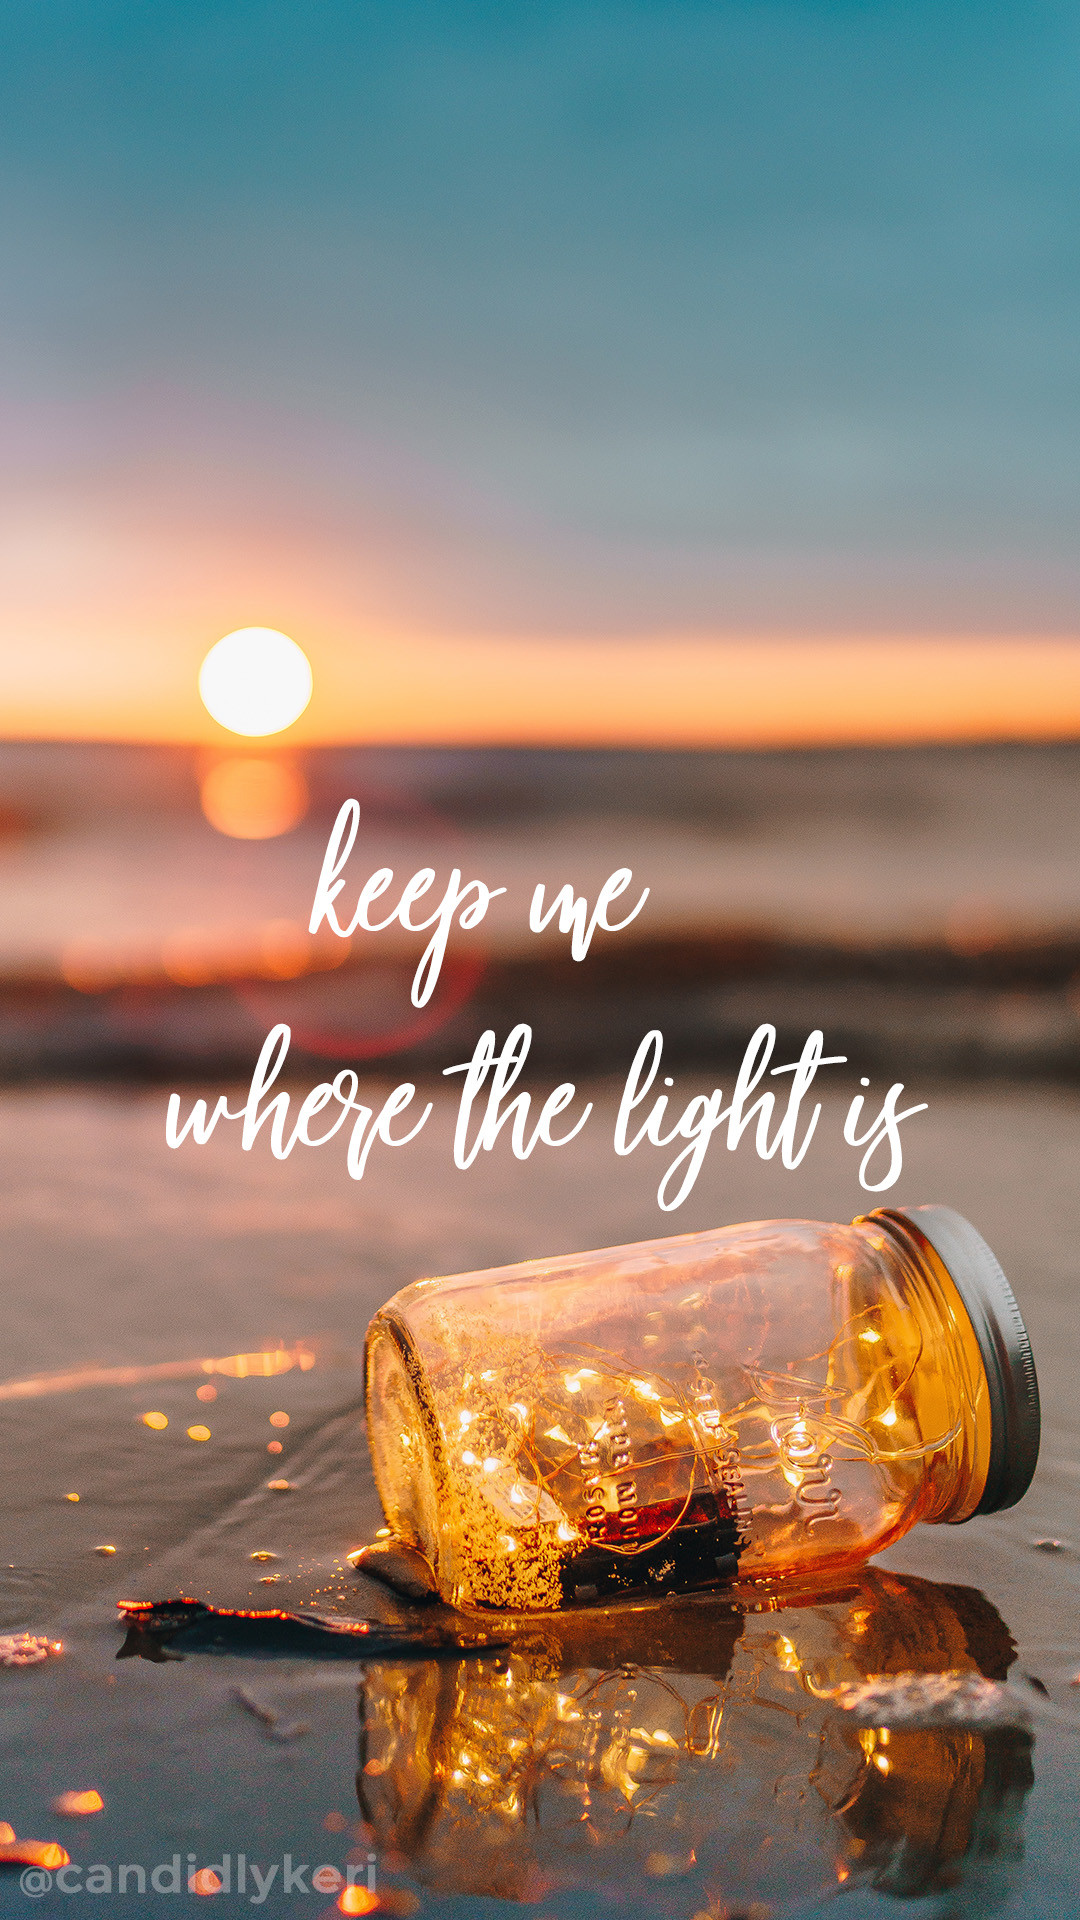 1080x1920 Keep me where the light is quote sunset mason jar wallpaper you can  download for free